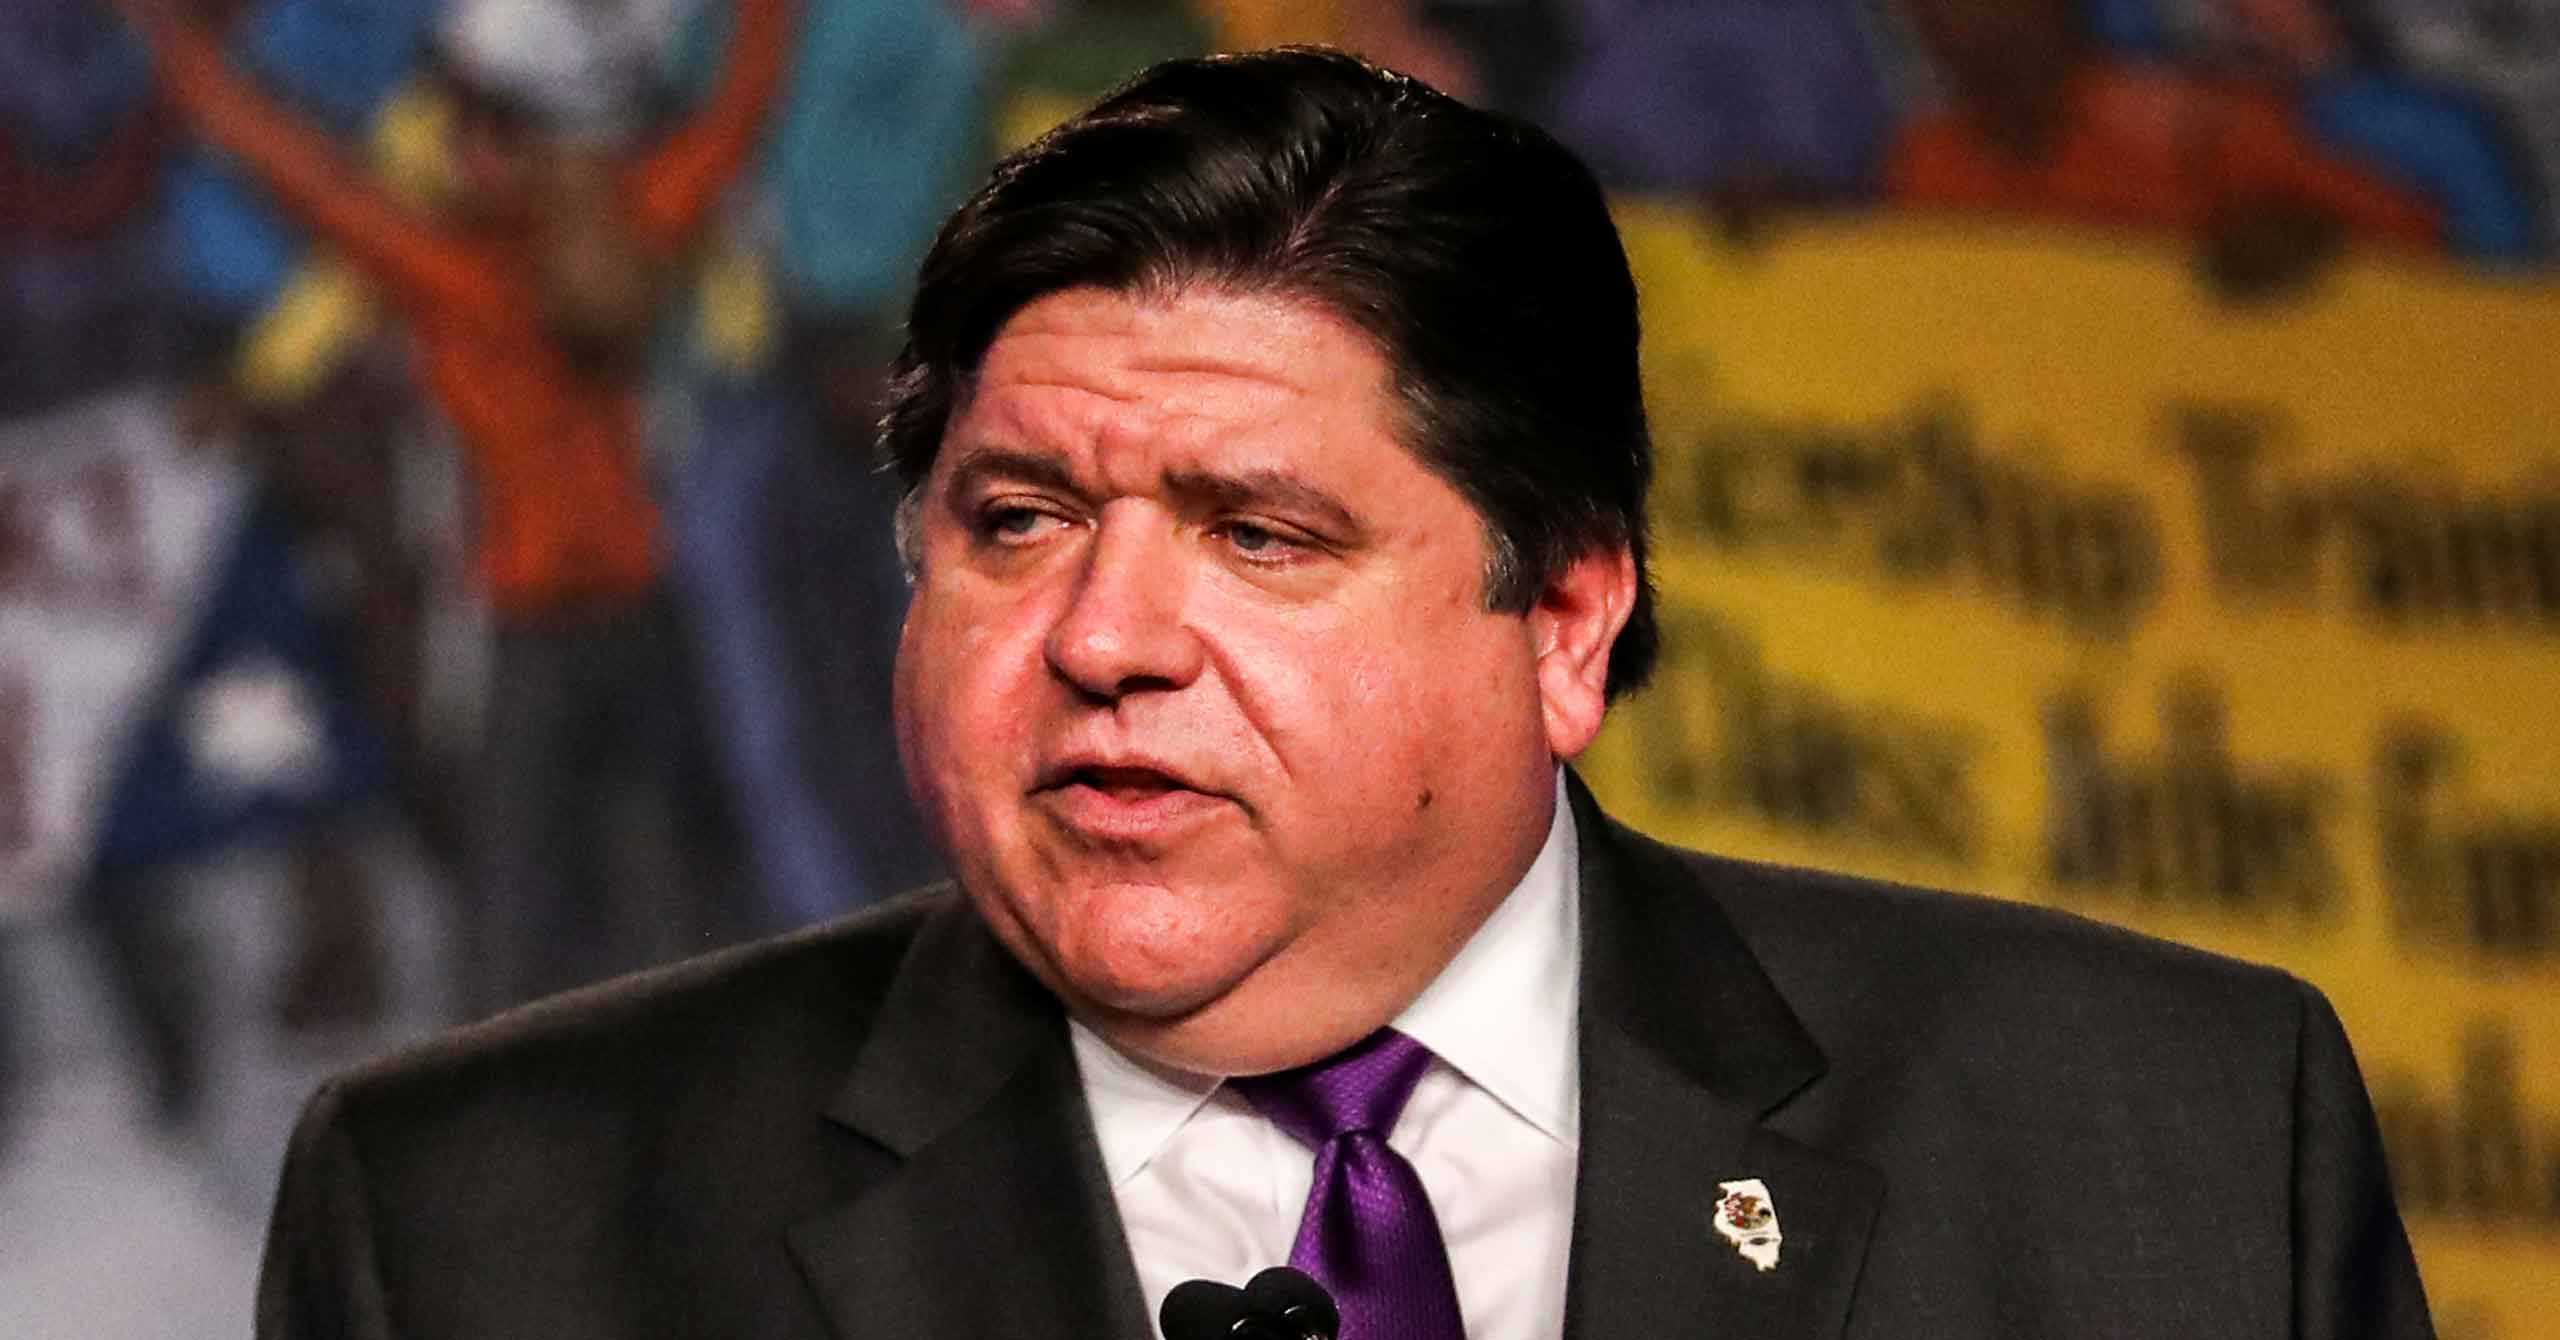 An Illinois bill that would limit how much state-regulated insurers can require members to pay for insulin awaits Gov. J.B. Pritzker’s signature.